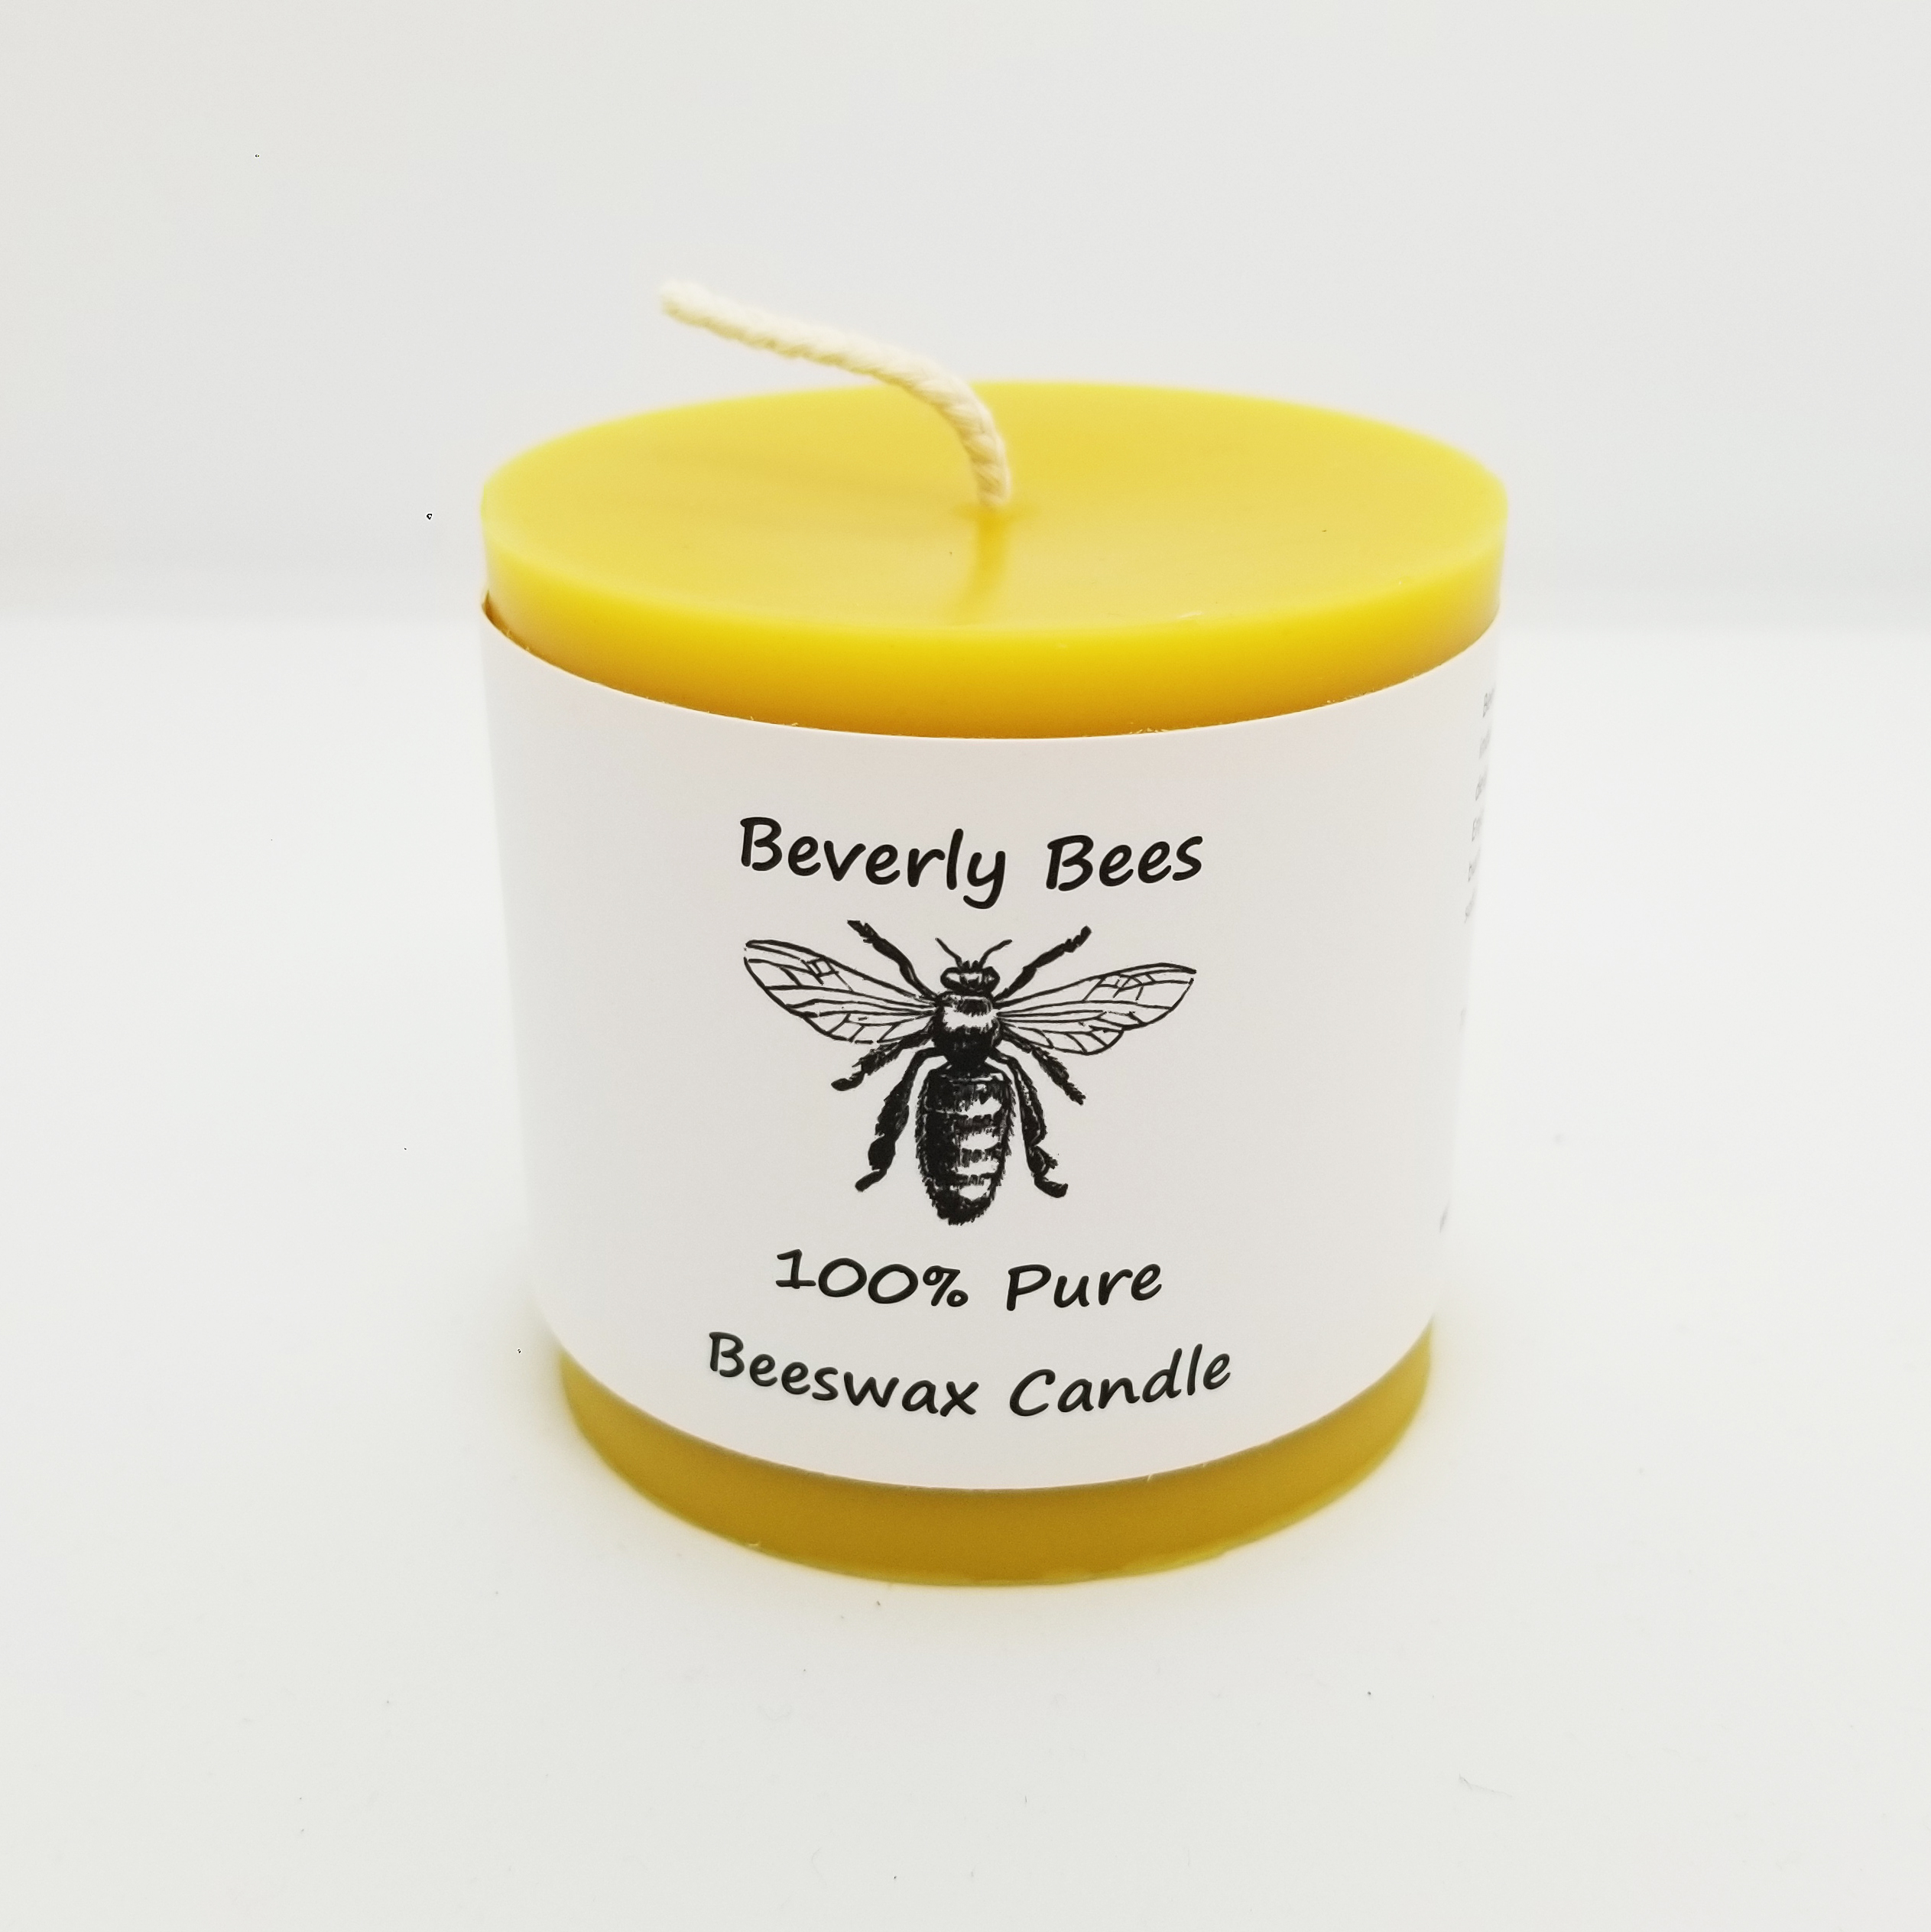 Create Your Own Beeswax Candles Set Including Bee Charms by Docrafts Simply Make Makes 2 Candles, DSM 106029 Votive and Honeycomb Candle